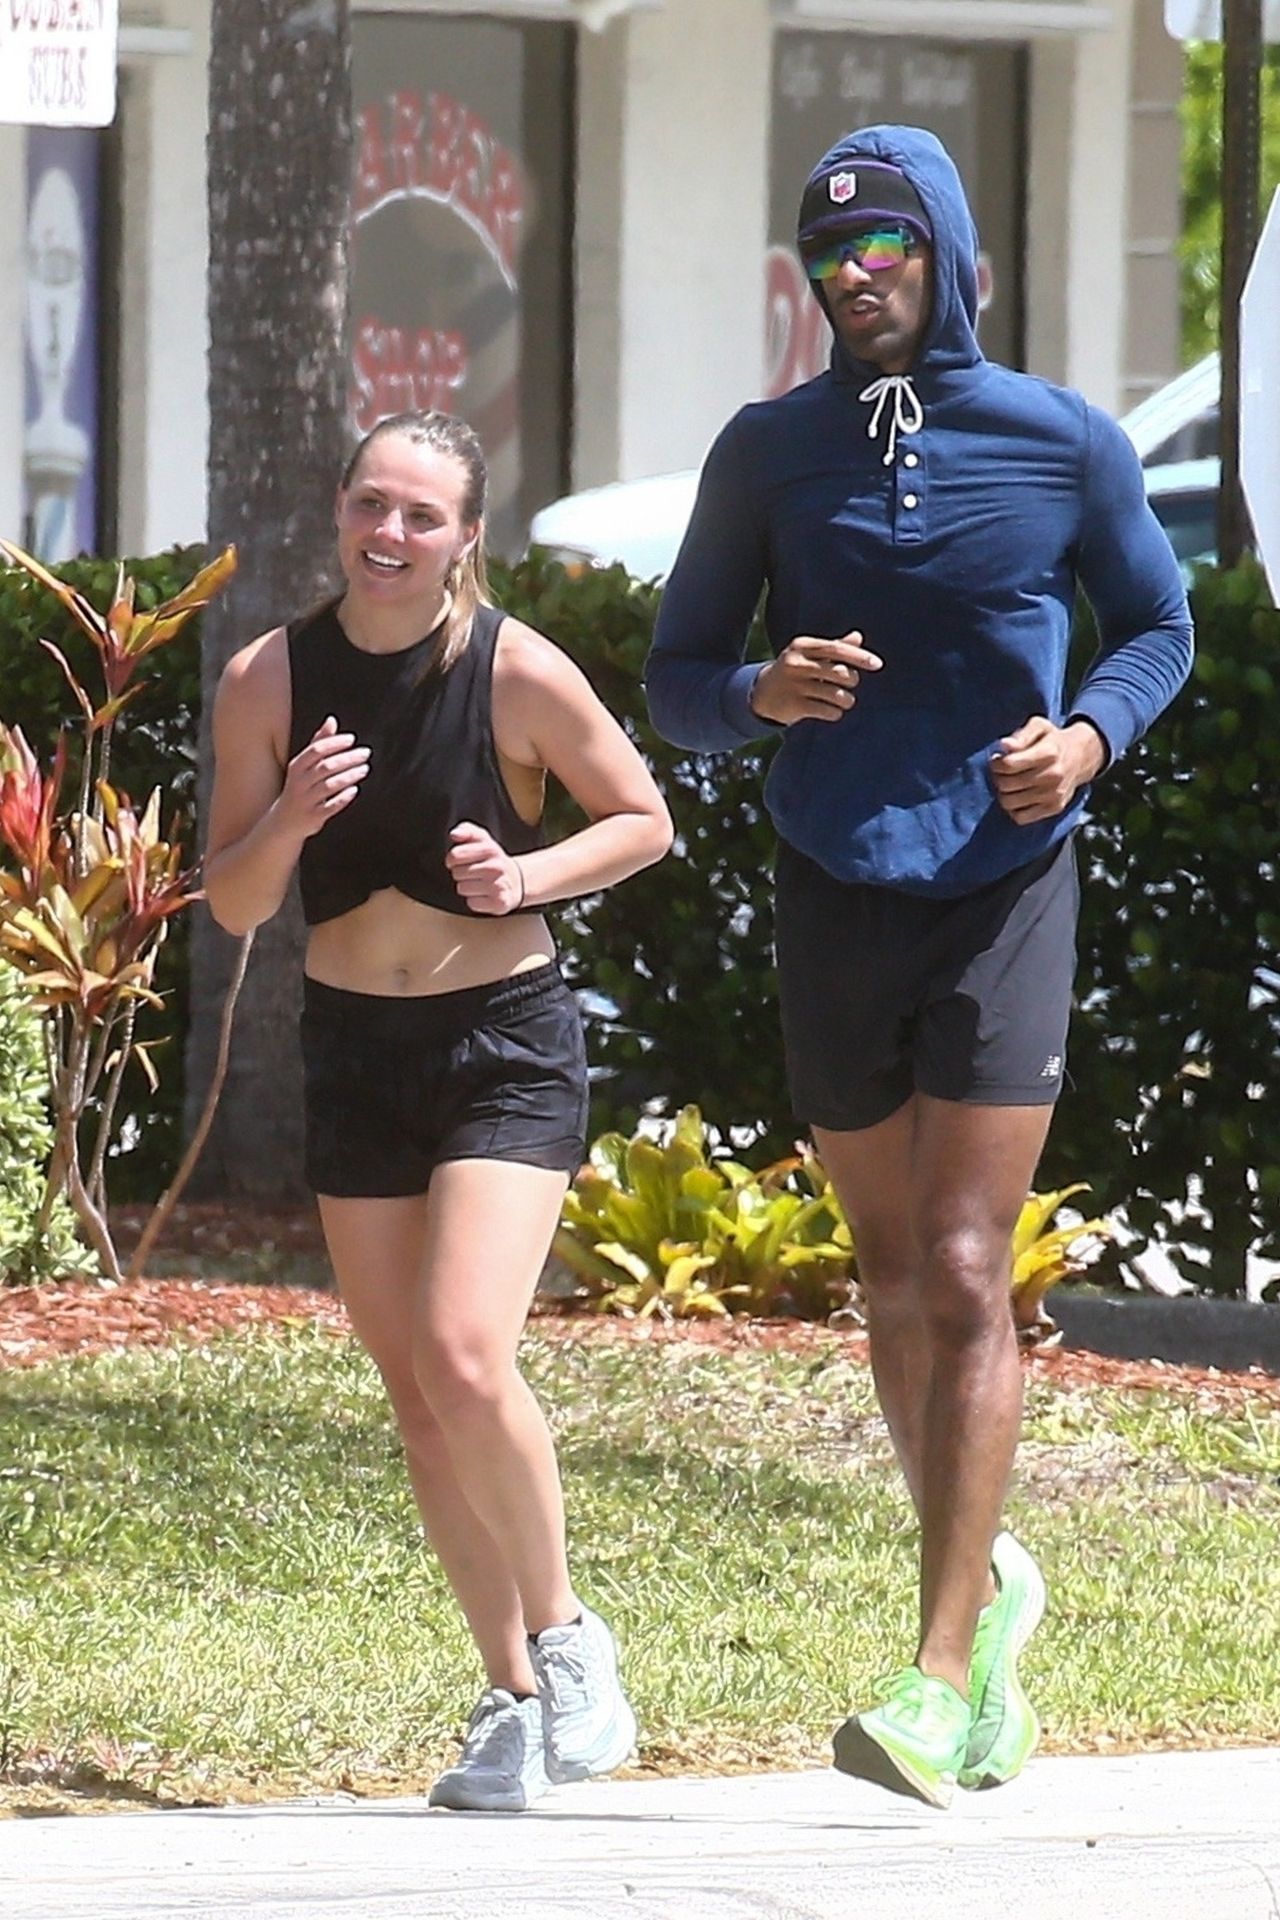 Hannah Brown Goes Jogging with her Trainer During Self-Quarantine in Florid...